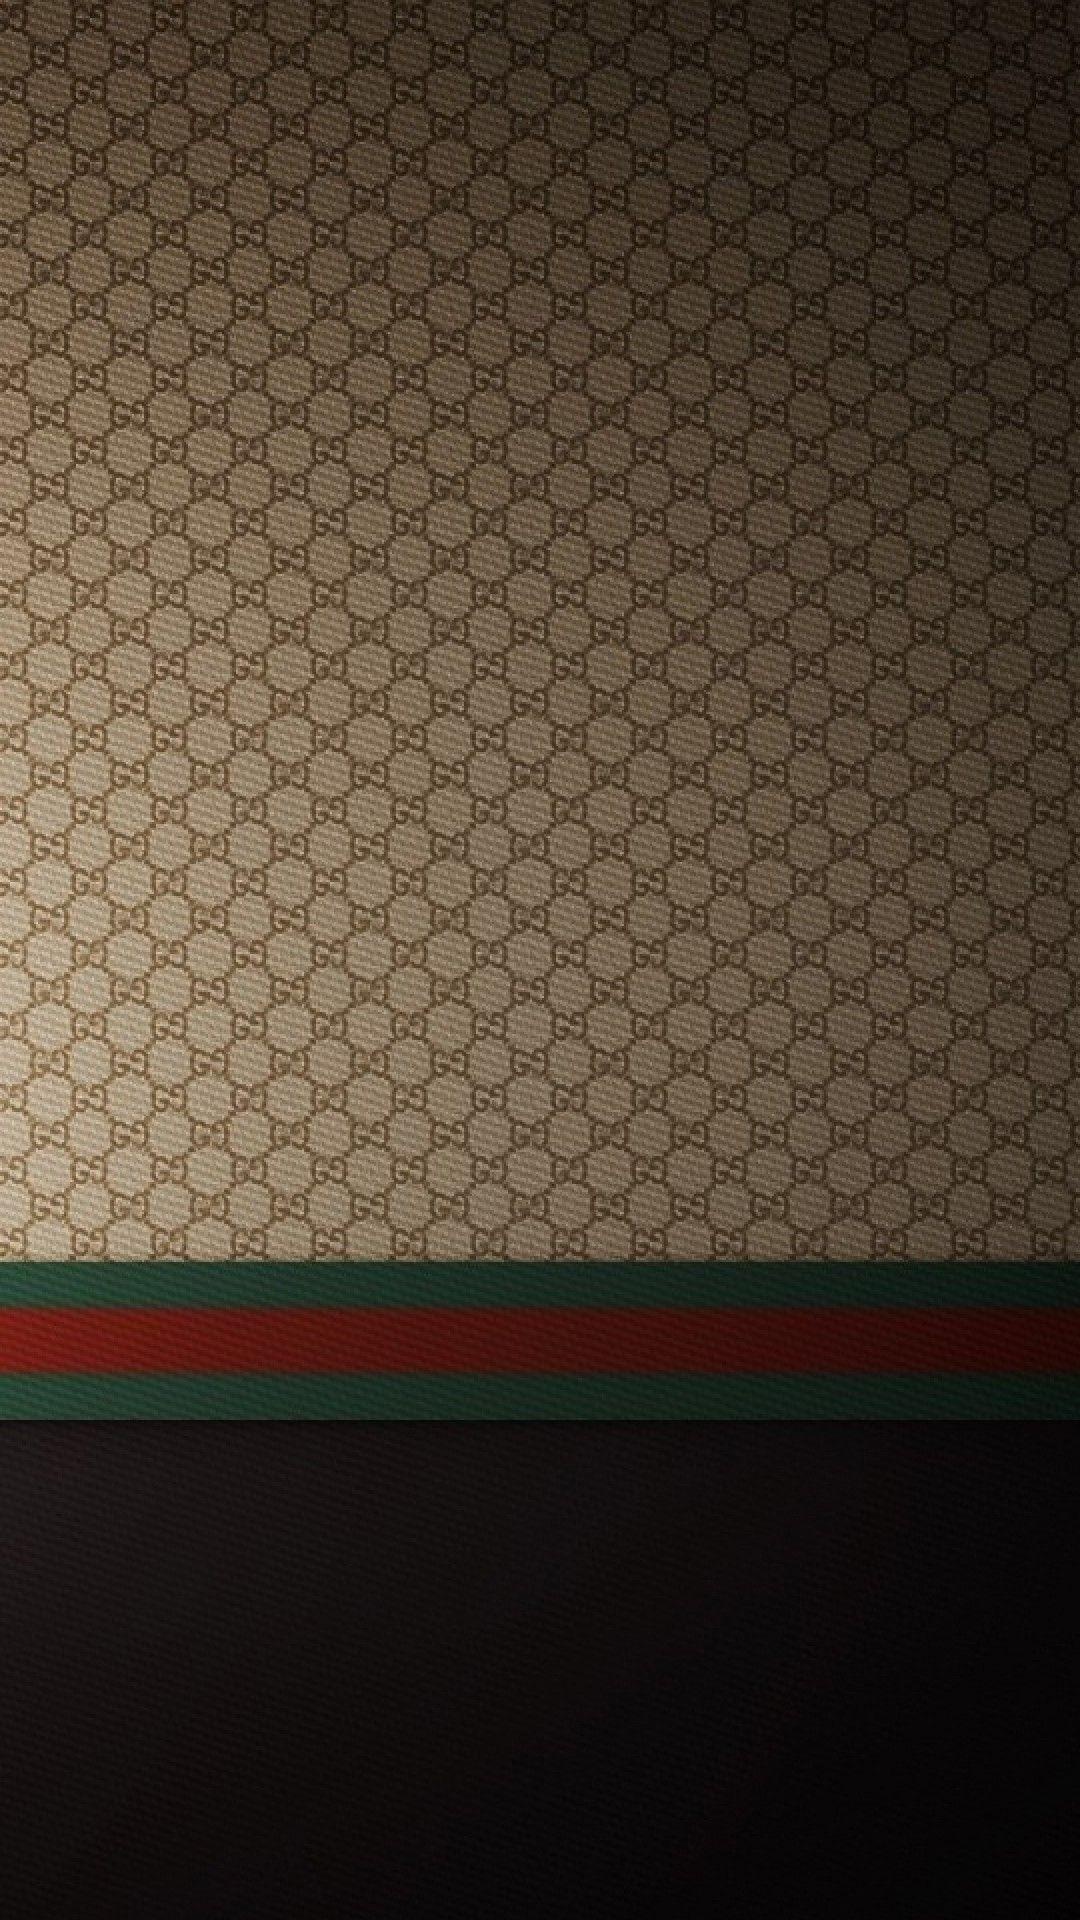 Brown Gucci wallpapers, Stylish background, Luxury fashion brand, Trendy designs, 1080x1920 Full HD Phone